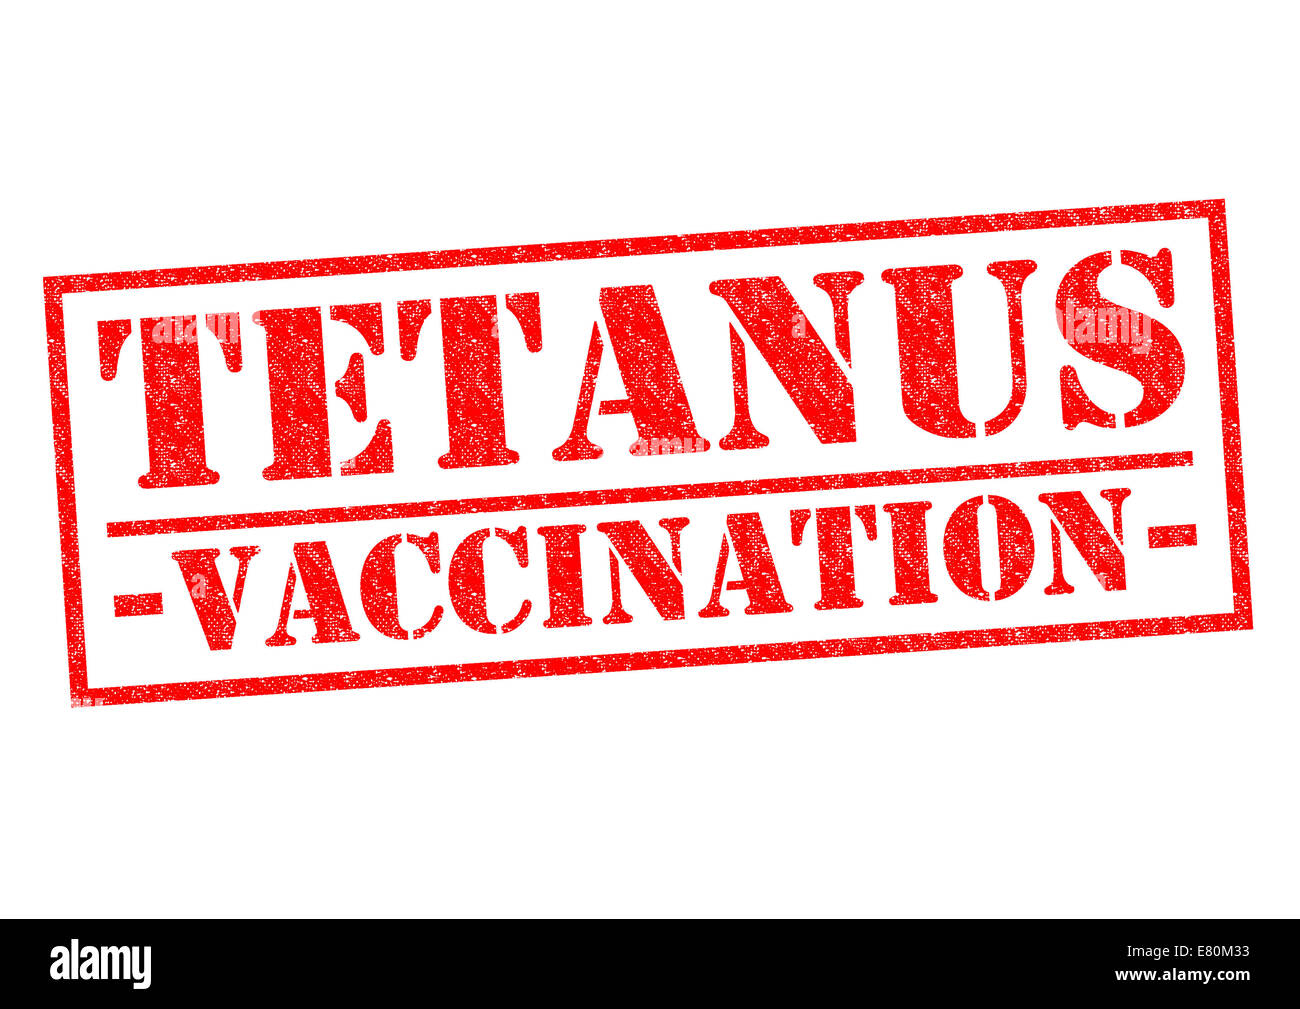 TETANUS VACCINATION red Rubber Stamp over a white background. Stock Photo